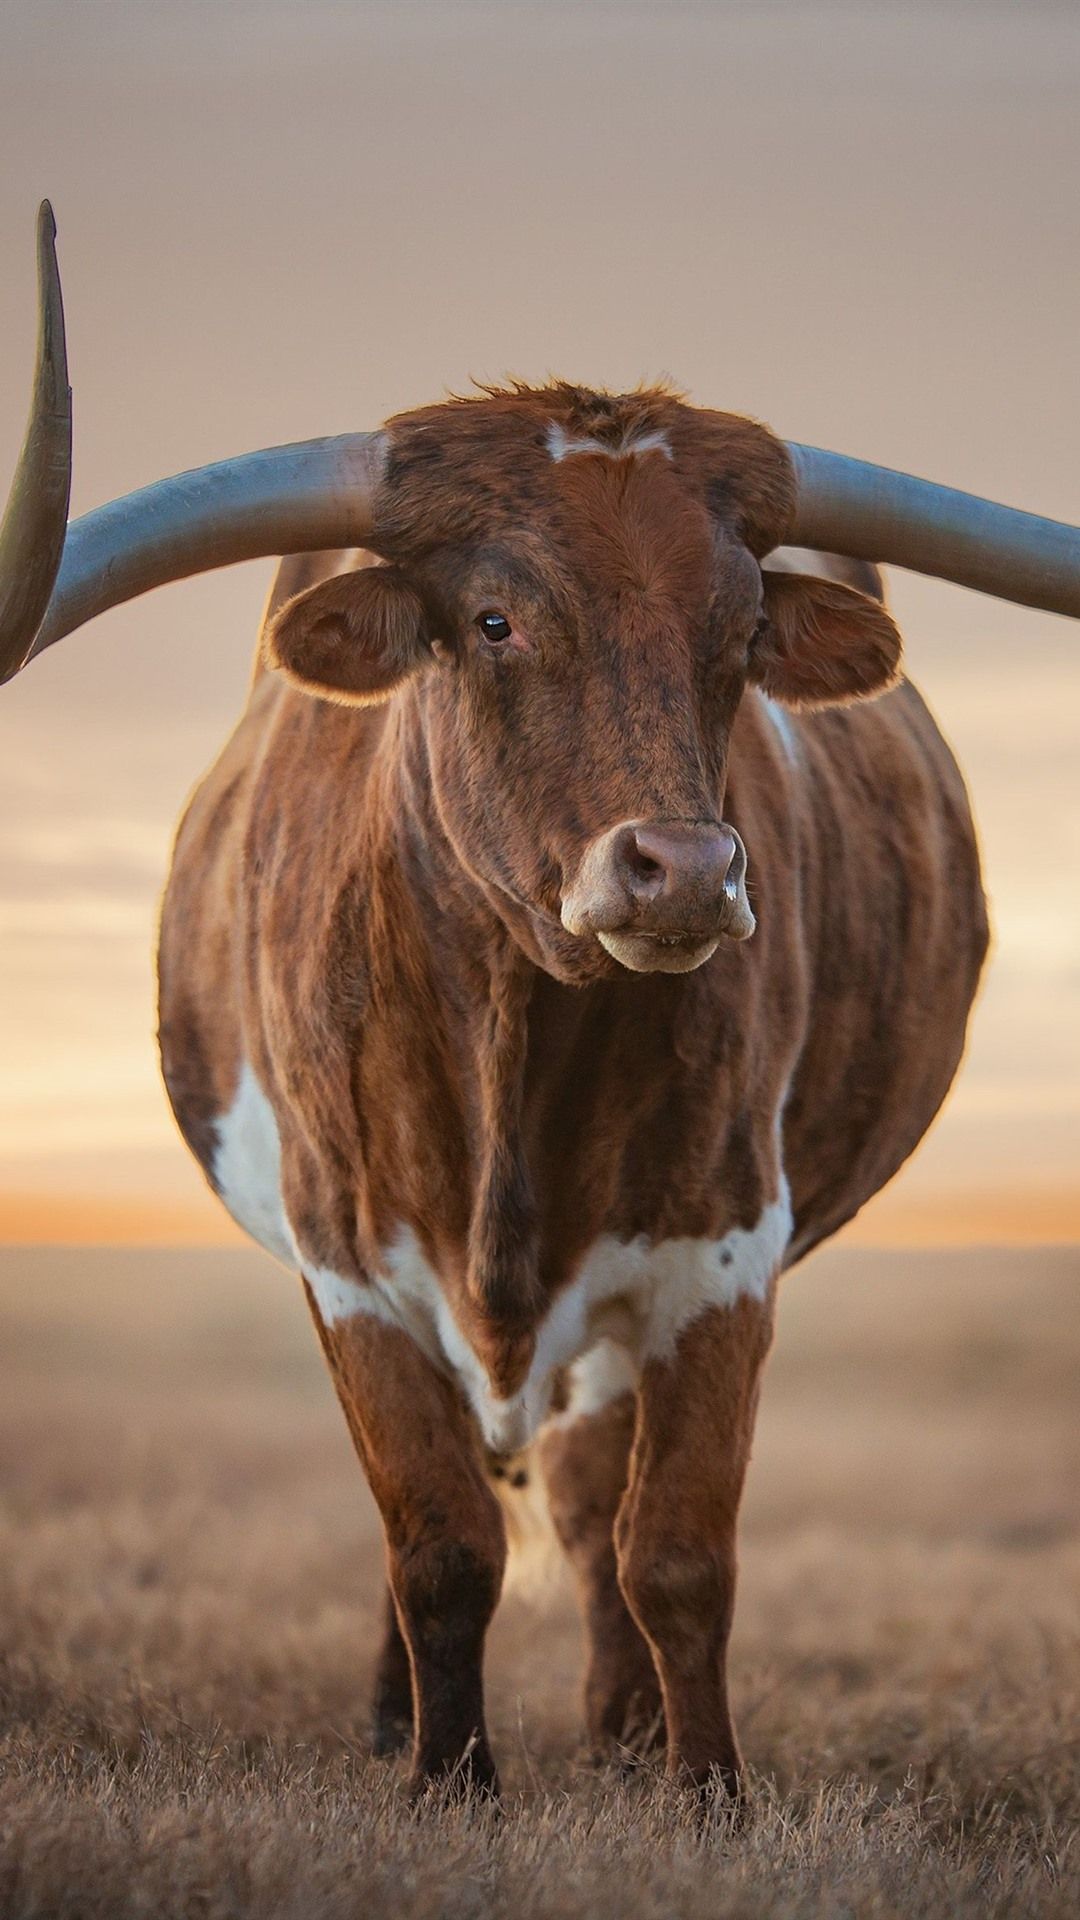 Cow Front View, Horns, Grass, Sunset 1080x1920 IPhone 8 7 6 6S